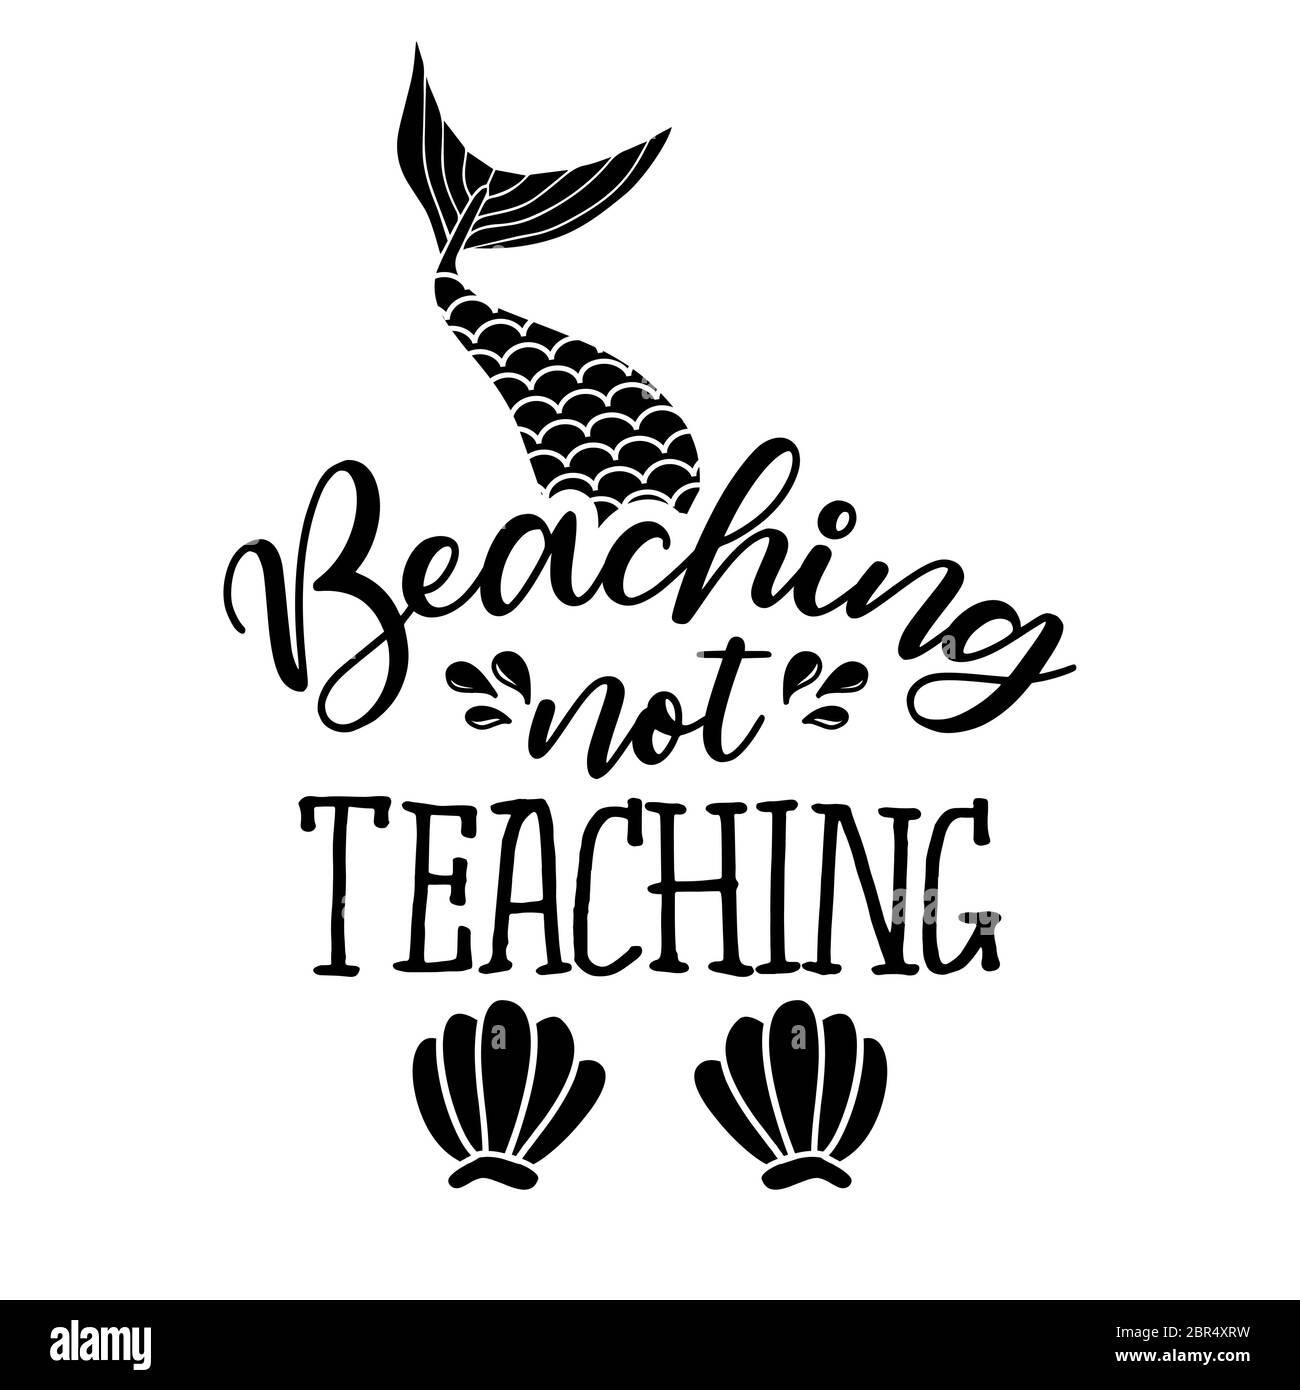 Beaching not teaching - funny motivation quotes in vector eps. Calligraphy summer lettering with mermaid tail. Good for invitation, poster, t-shirts, Stock Vector